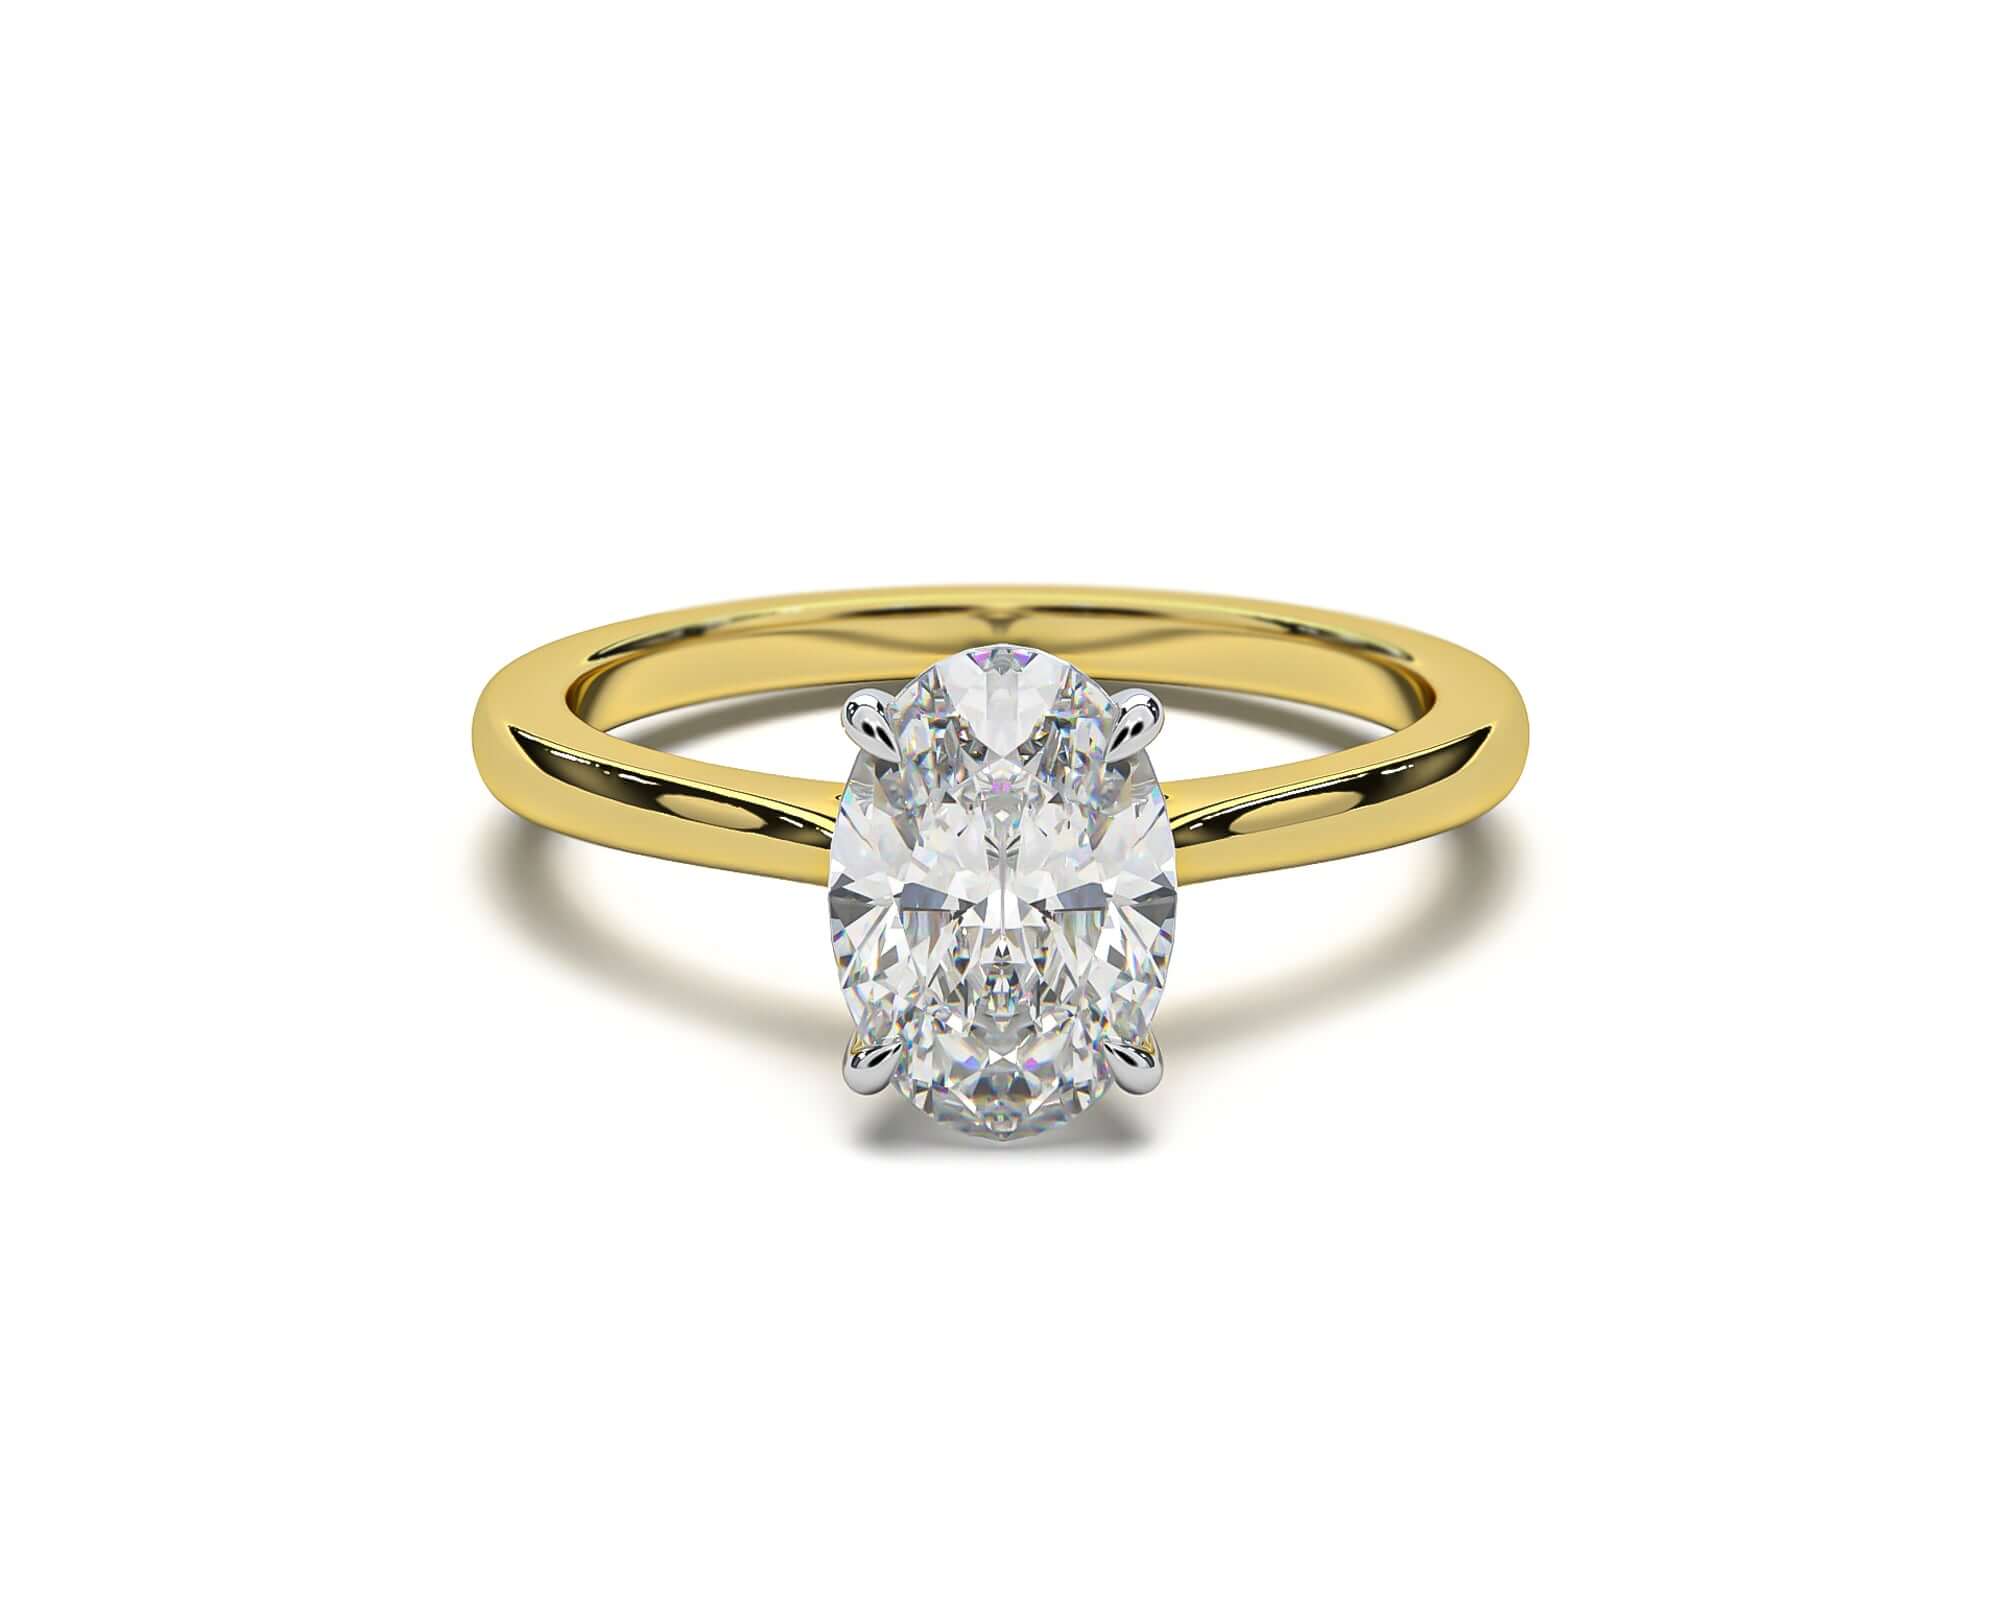 Oval Cut Diamond Engagement Ring Gold